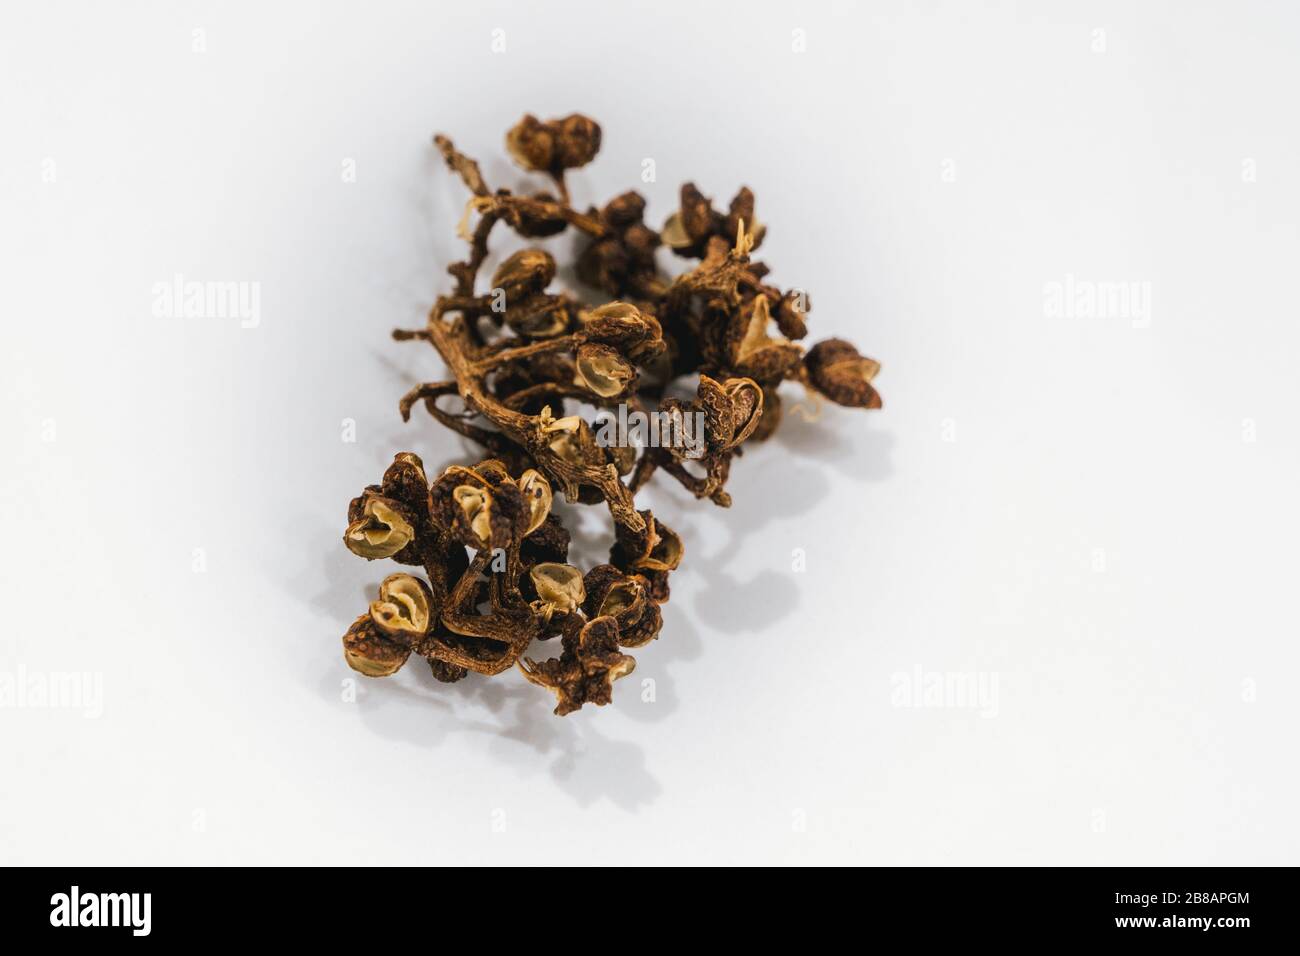 Rare, Wild Andaliman Pepper Spice from Northern Sumatra Isolated on White Background Stock Photo